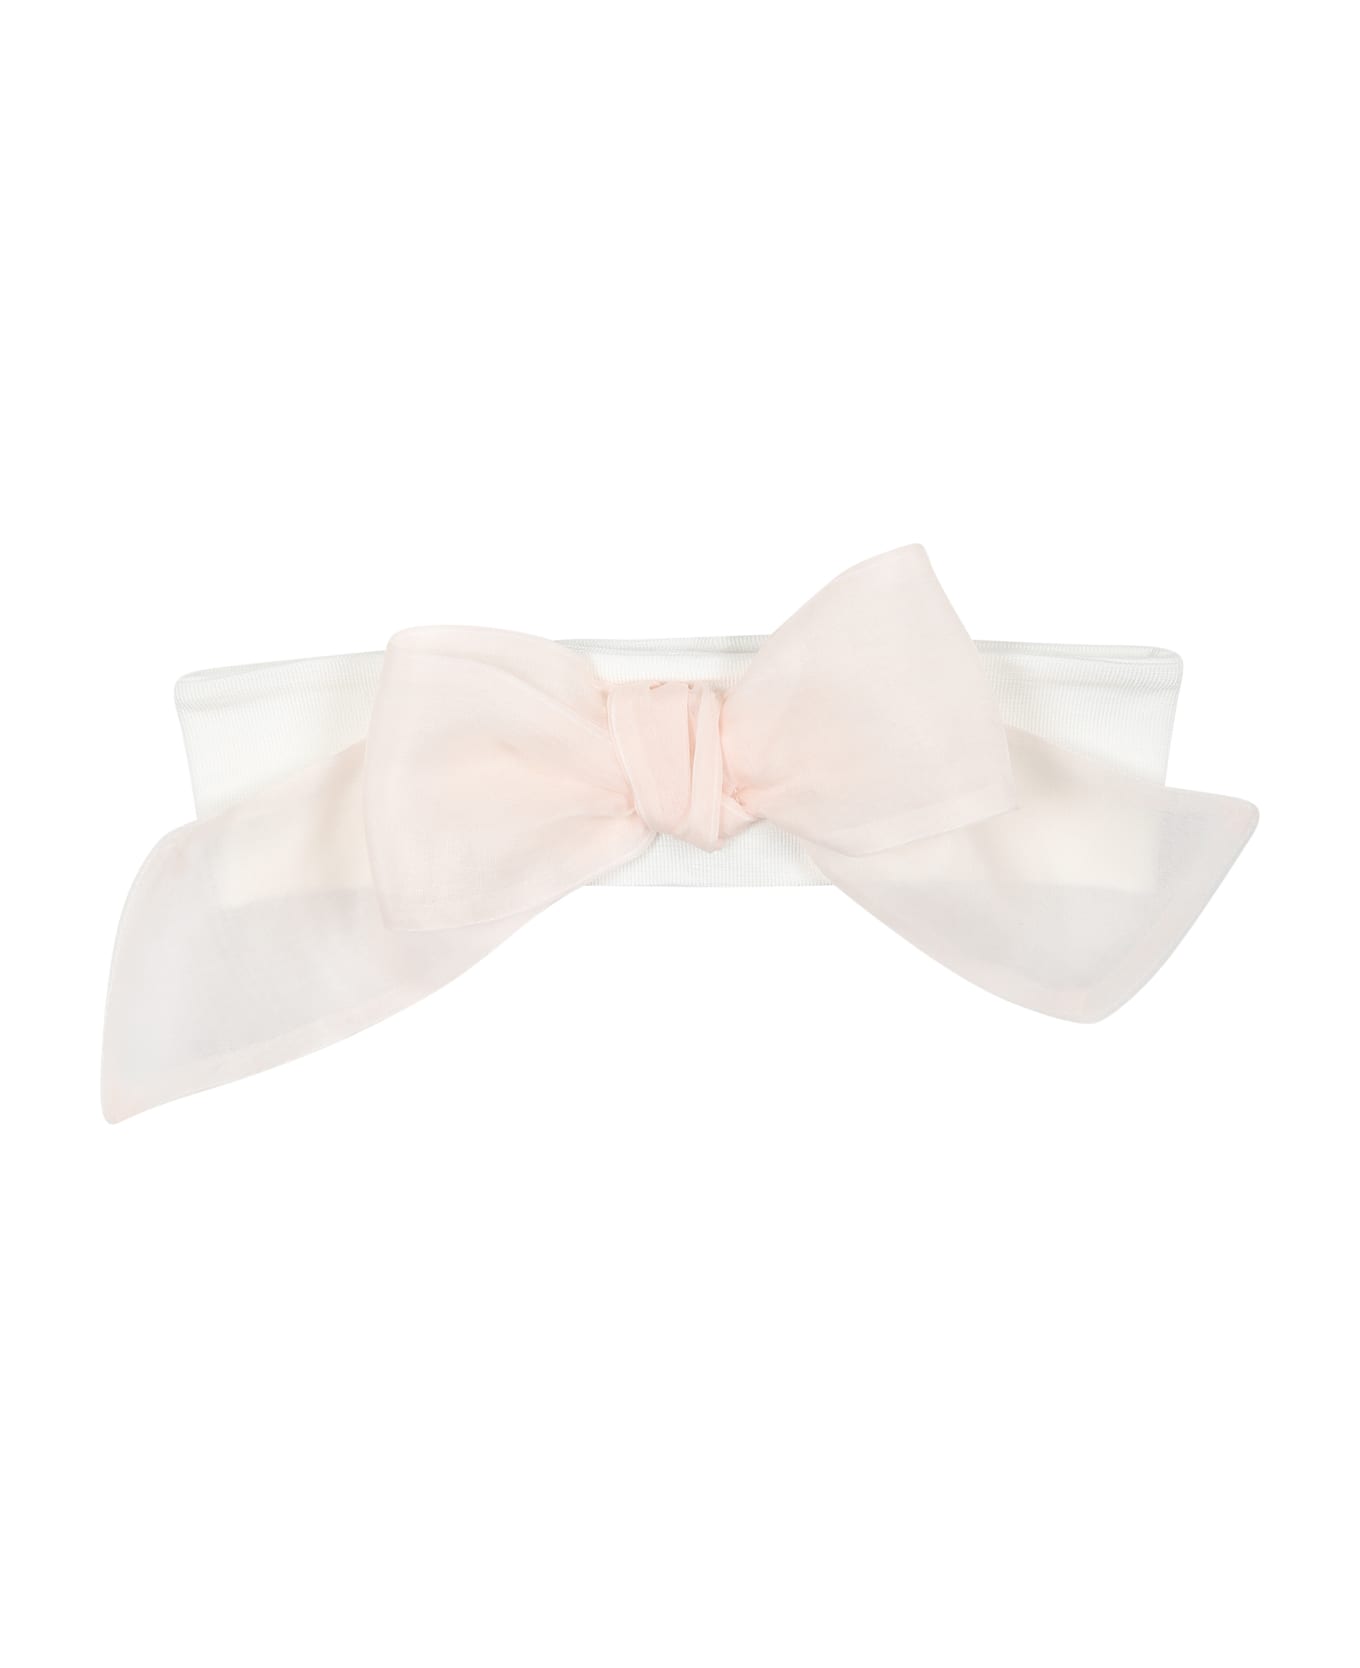 La stupenderia White Headband For Baby Girl With Pink Bow - White